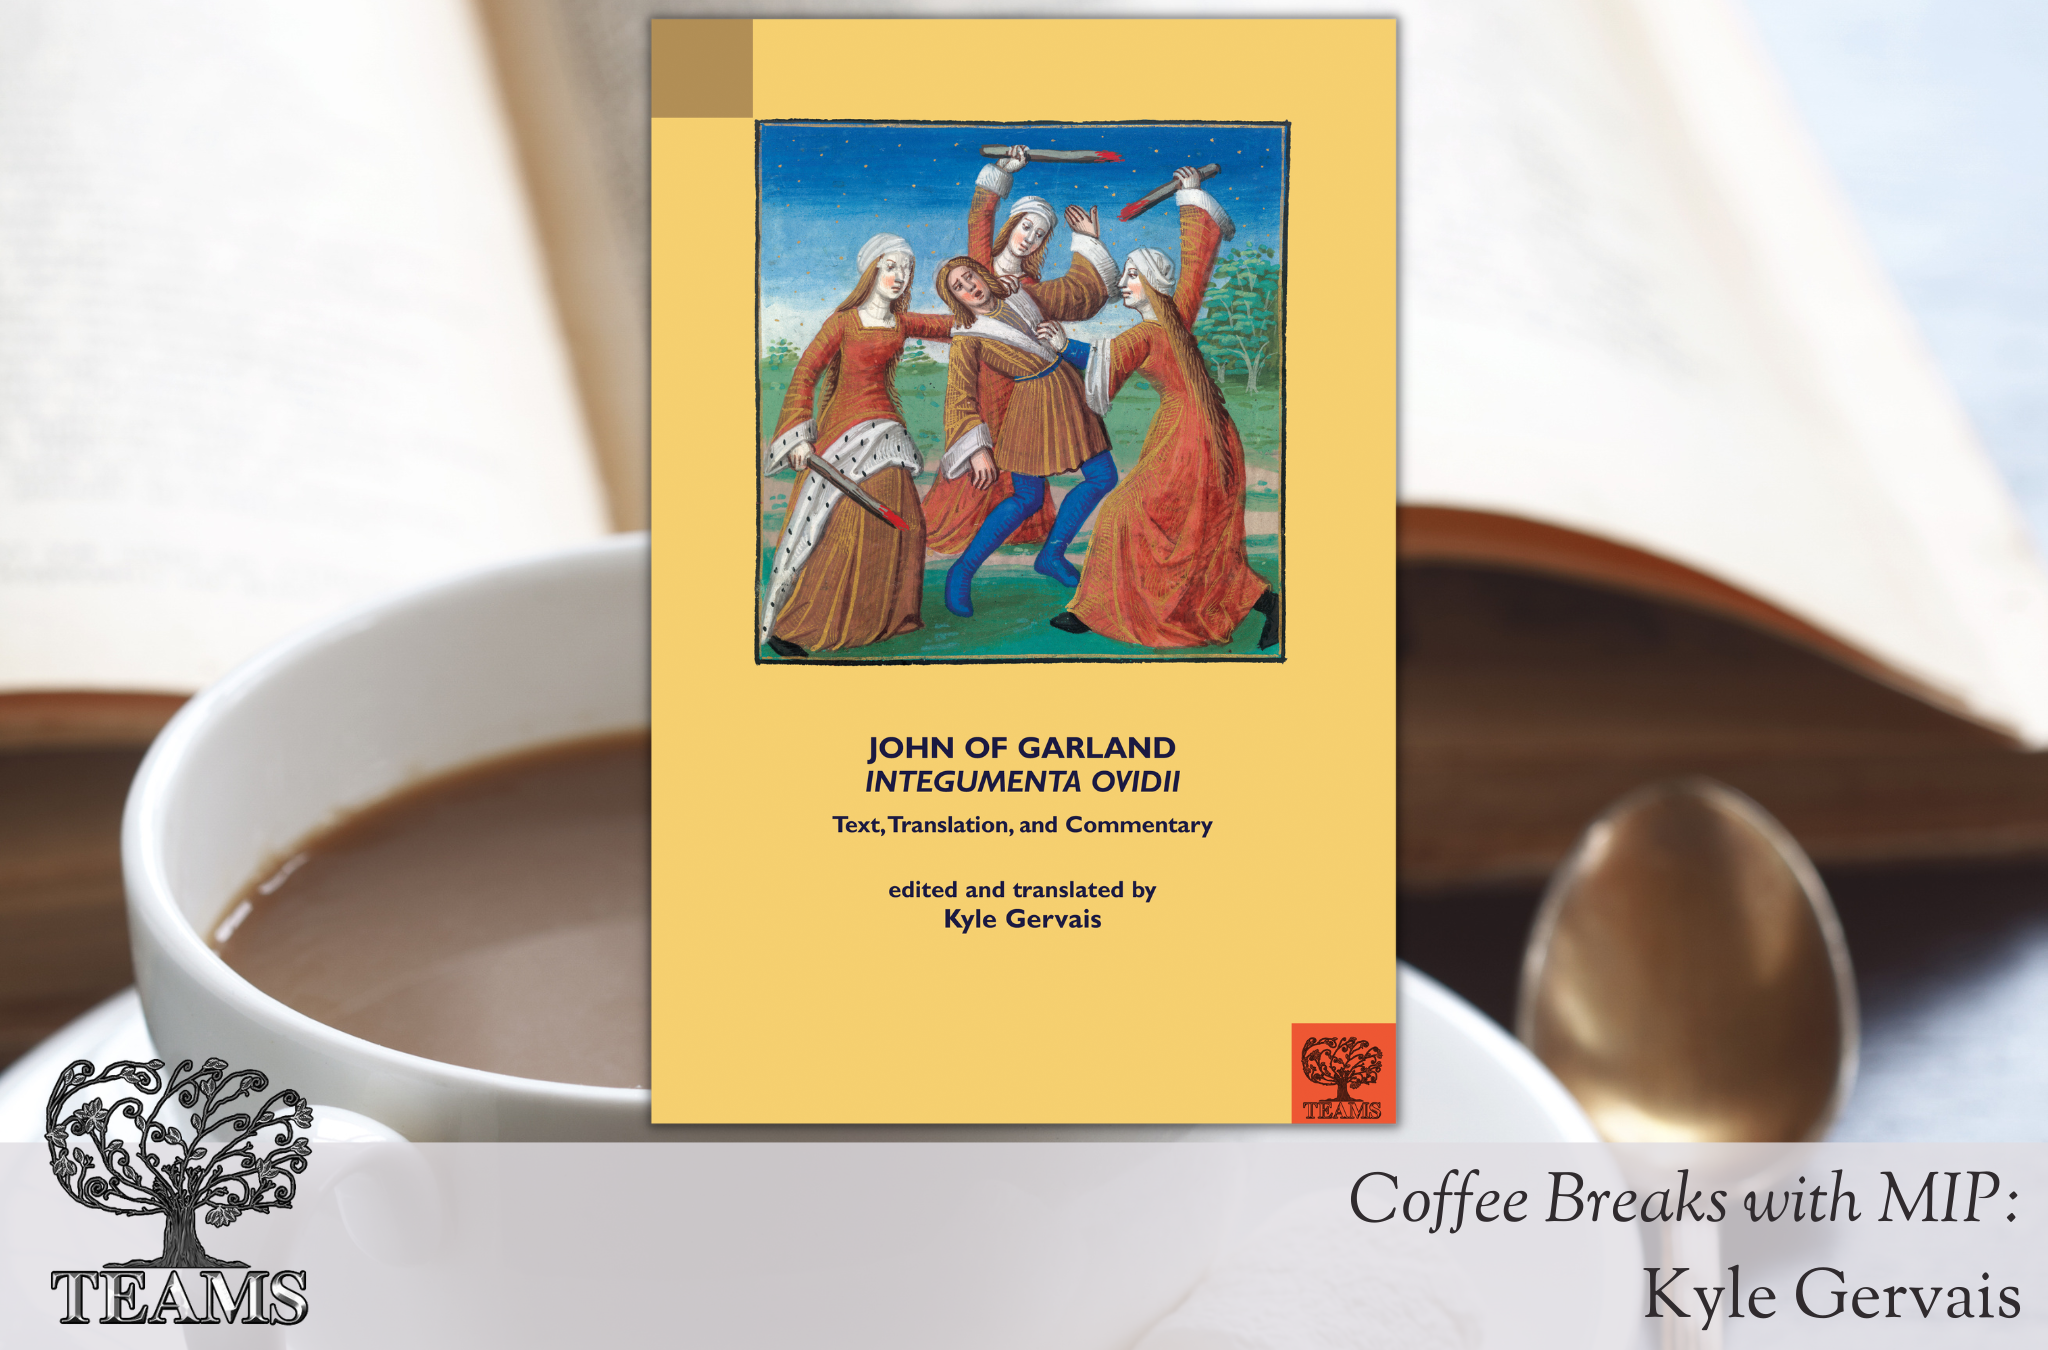 The cover of John of Garland, Integumenta Ovidii: a manuscript image of several women beating a man with clubs, the title in blue on a yellow background. Behind the book cover is an image of a coffee cup and an open book. At the bottom are the TEAMS logo and text reading Coffee Breaks with MIP: Kyle Gervais